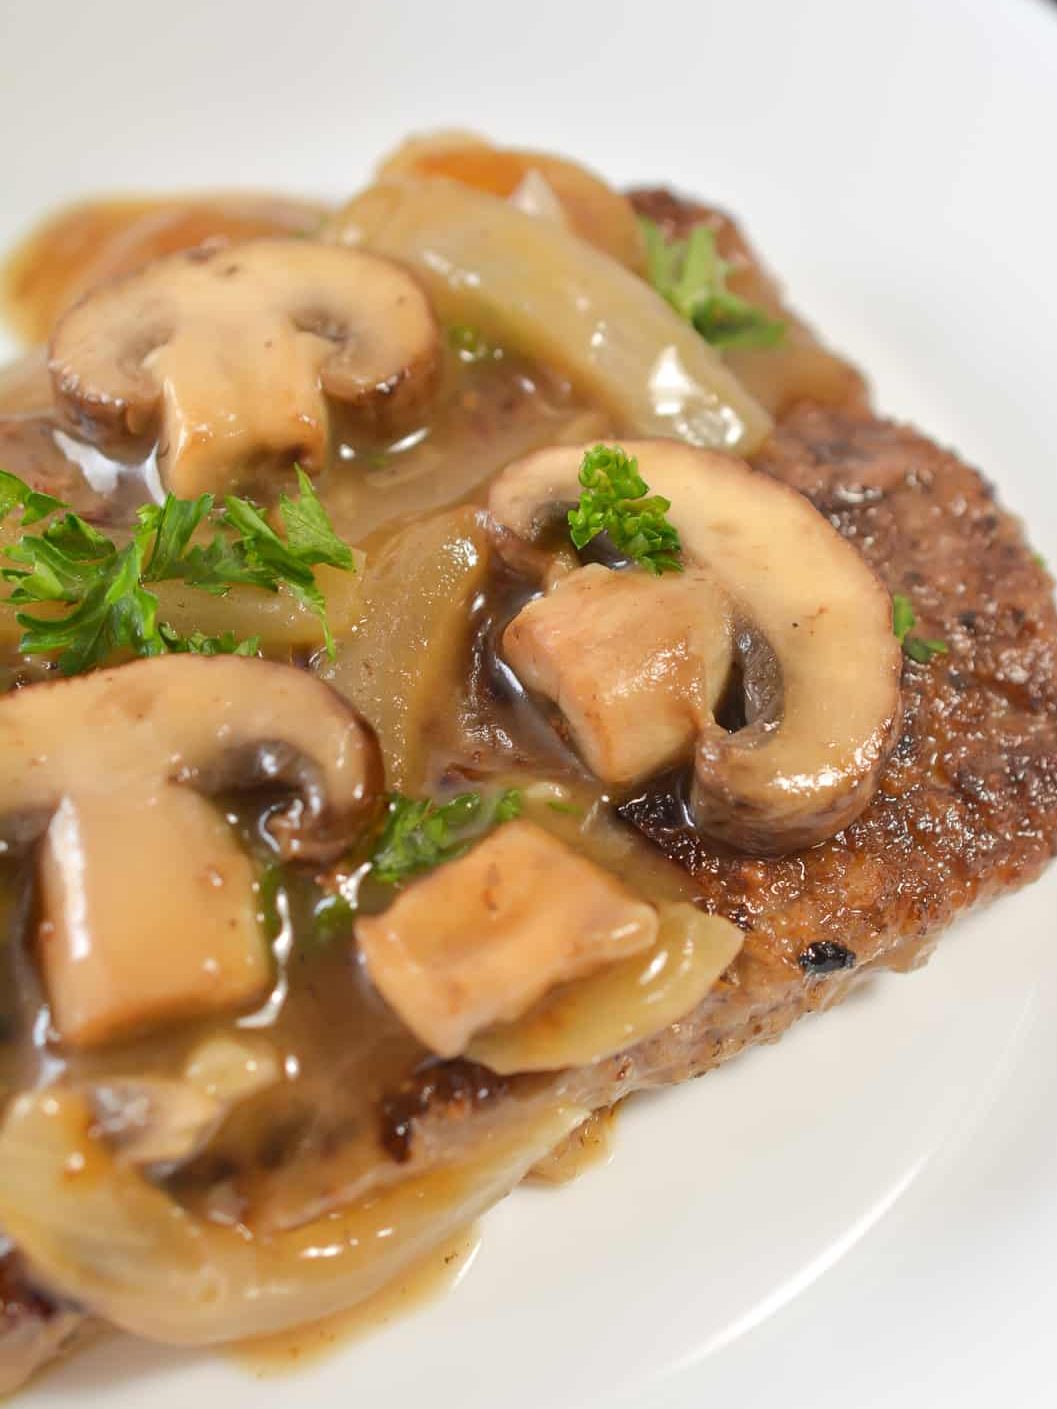 smothered cube steak, recipe for smothered cube steak, cube steak recipe